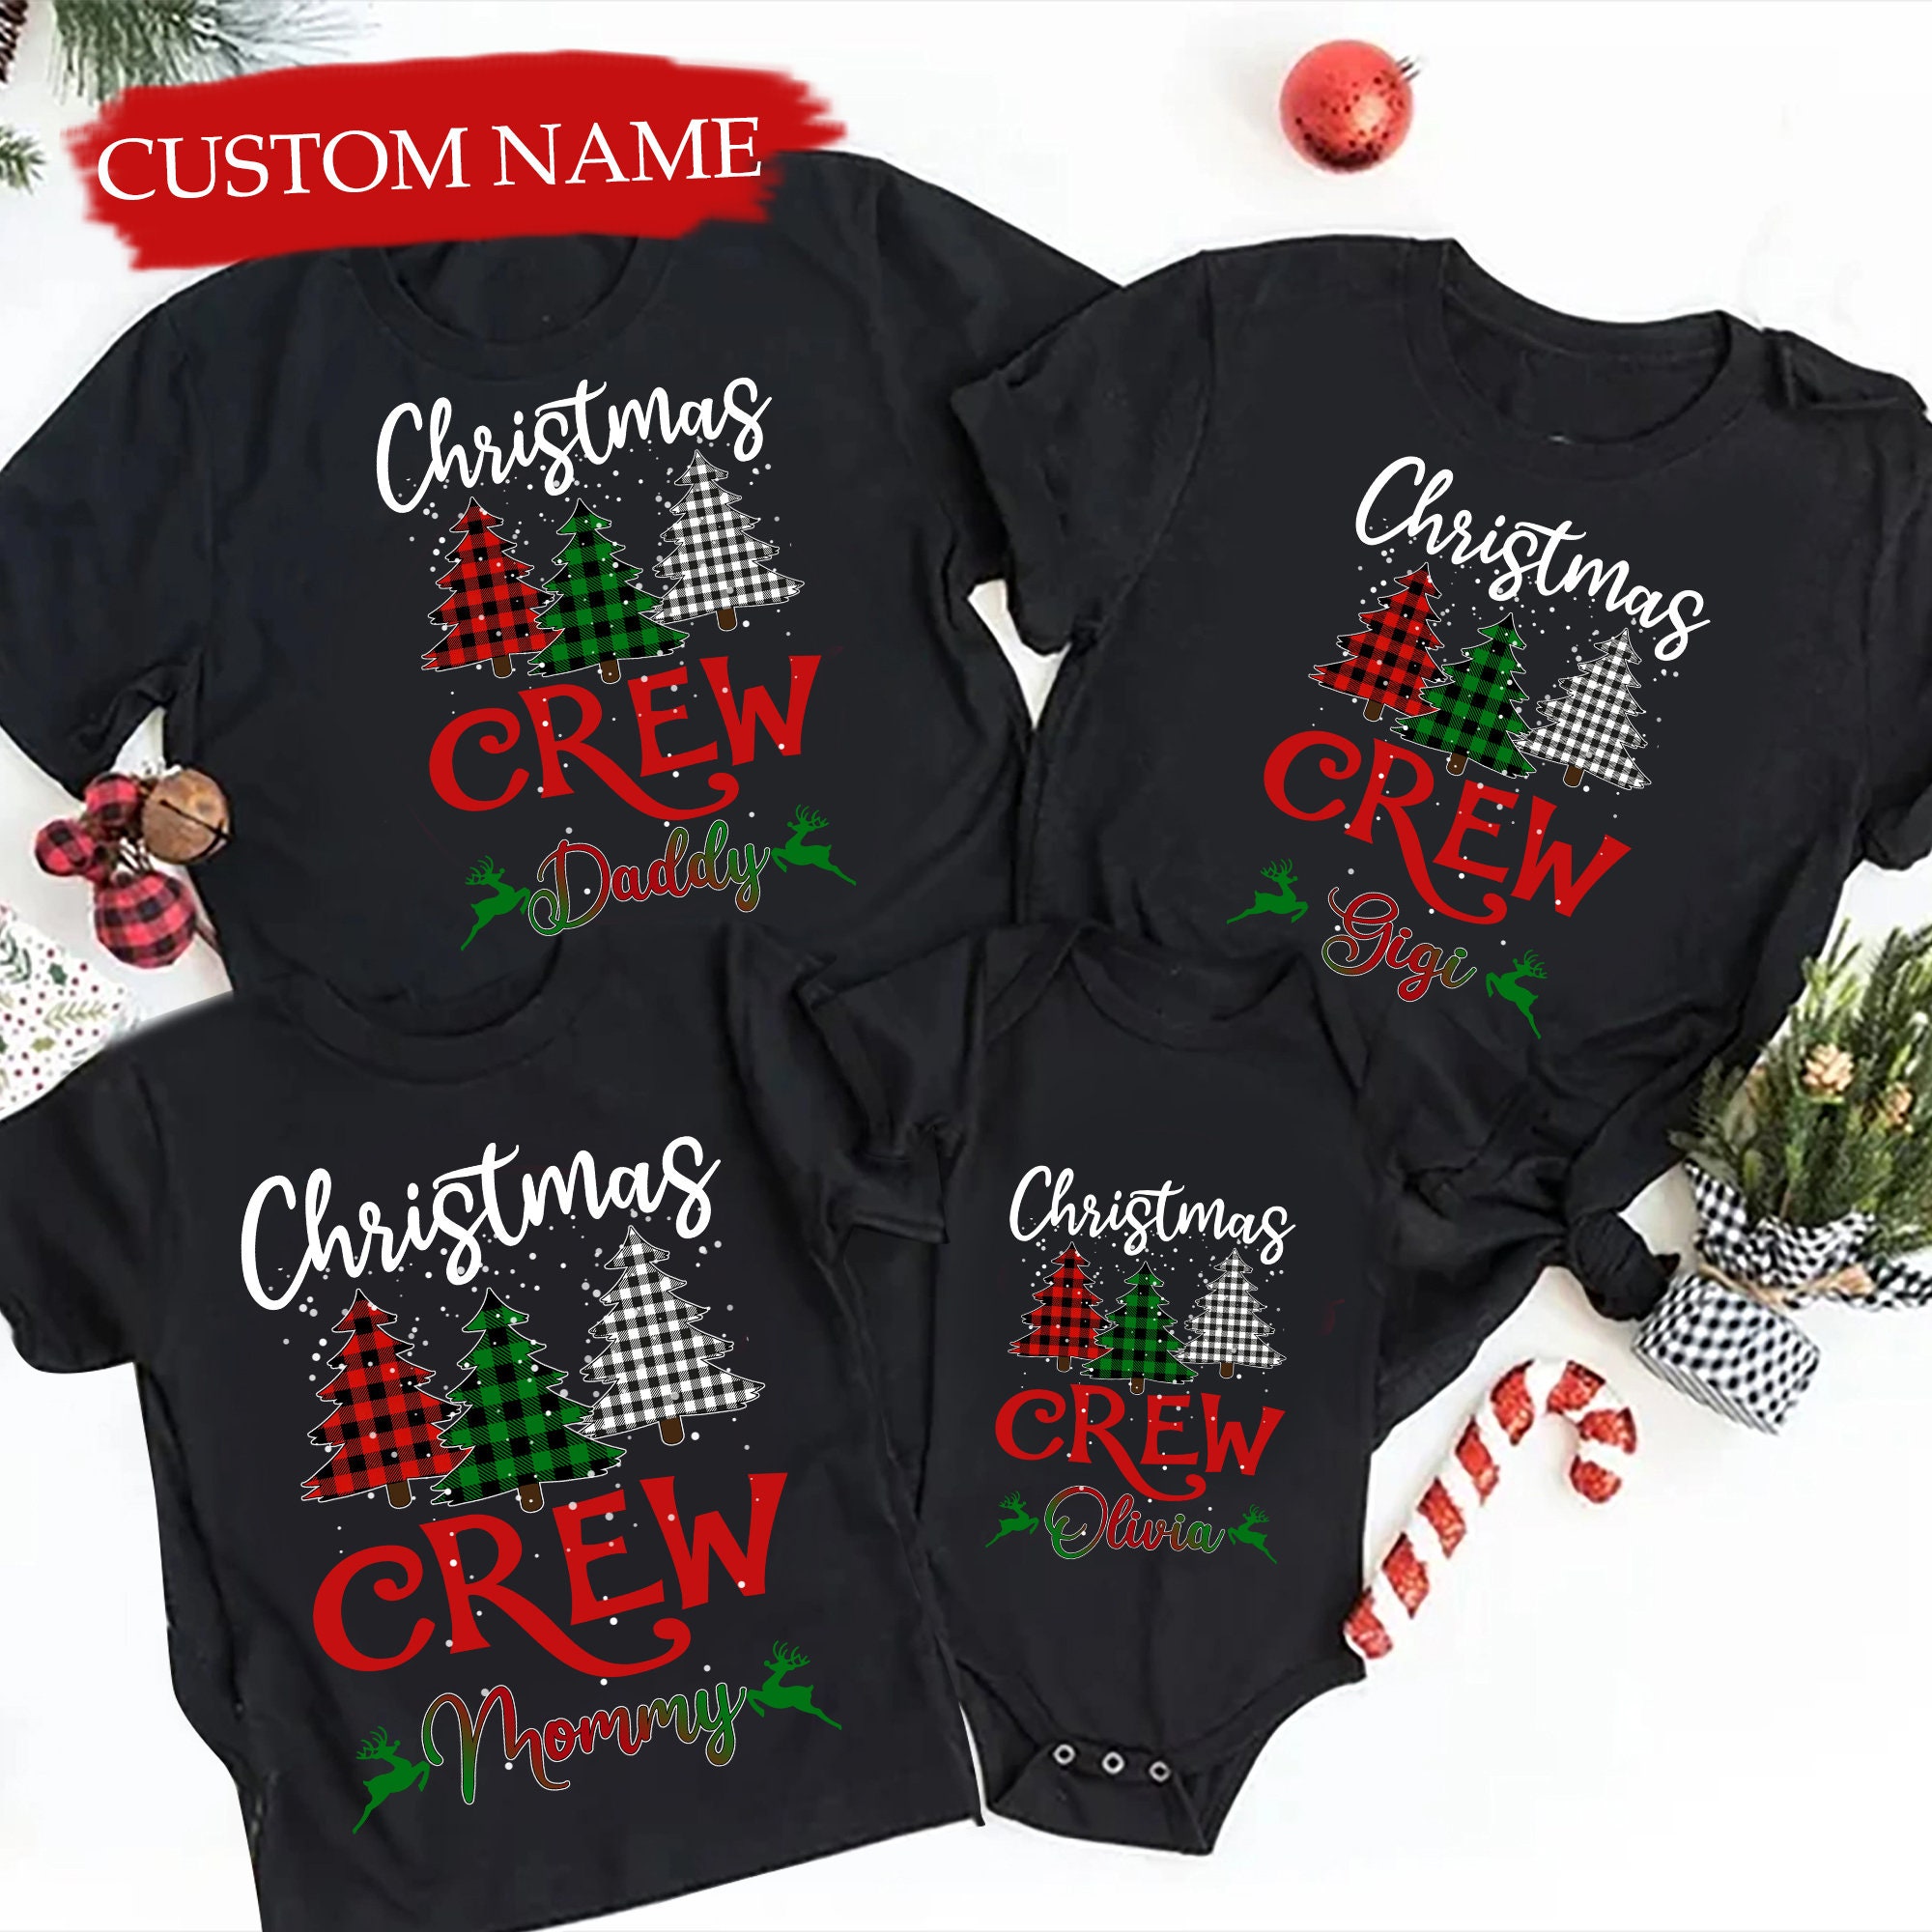 Discover Personalized Christmas Crew Shirt